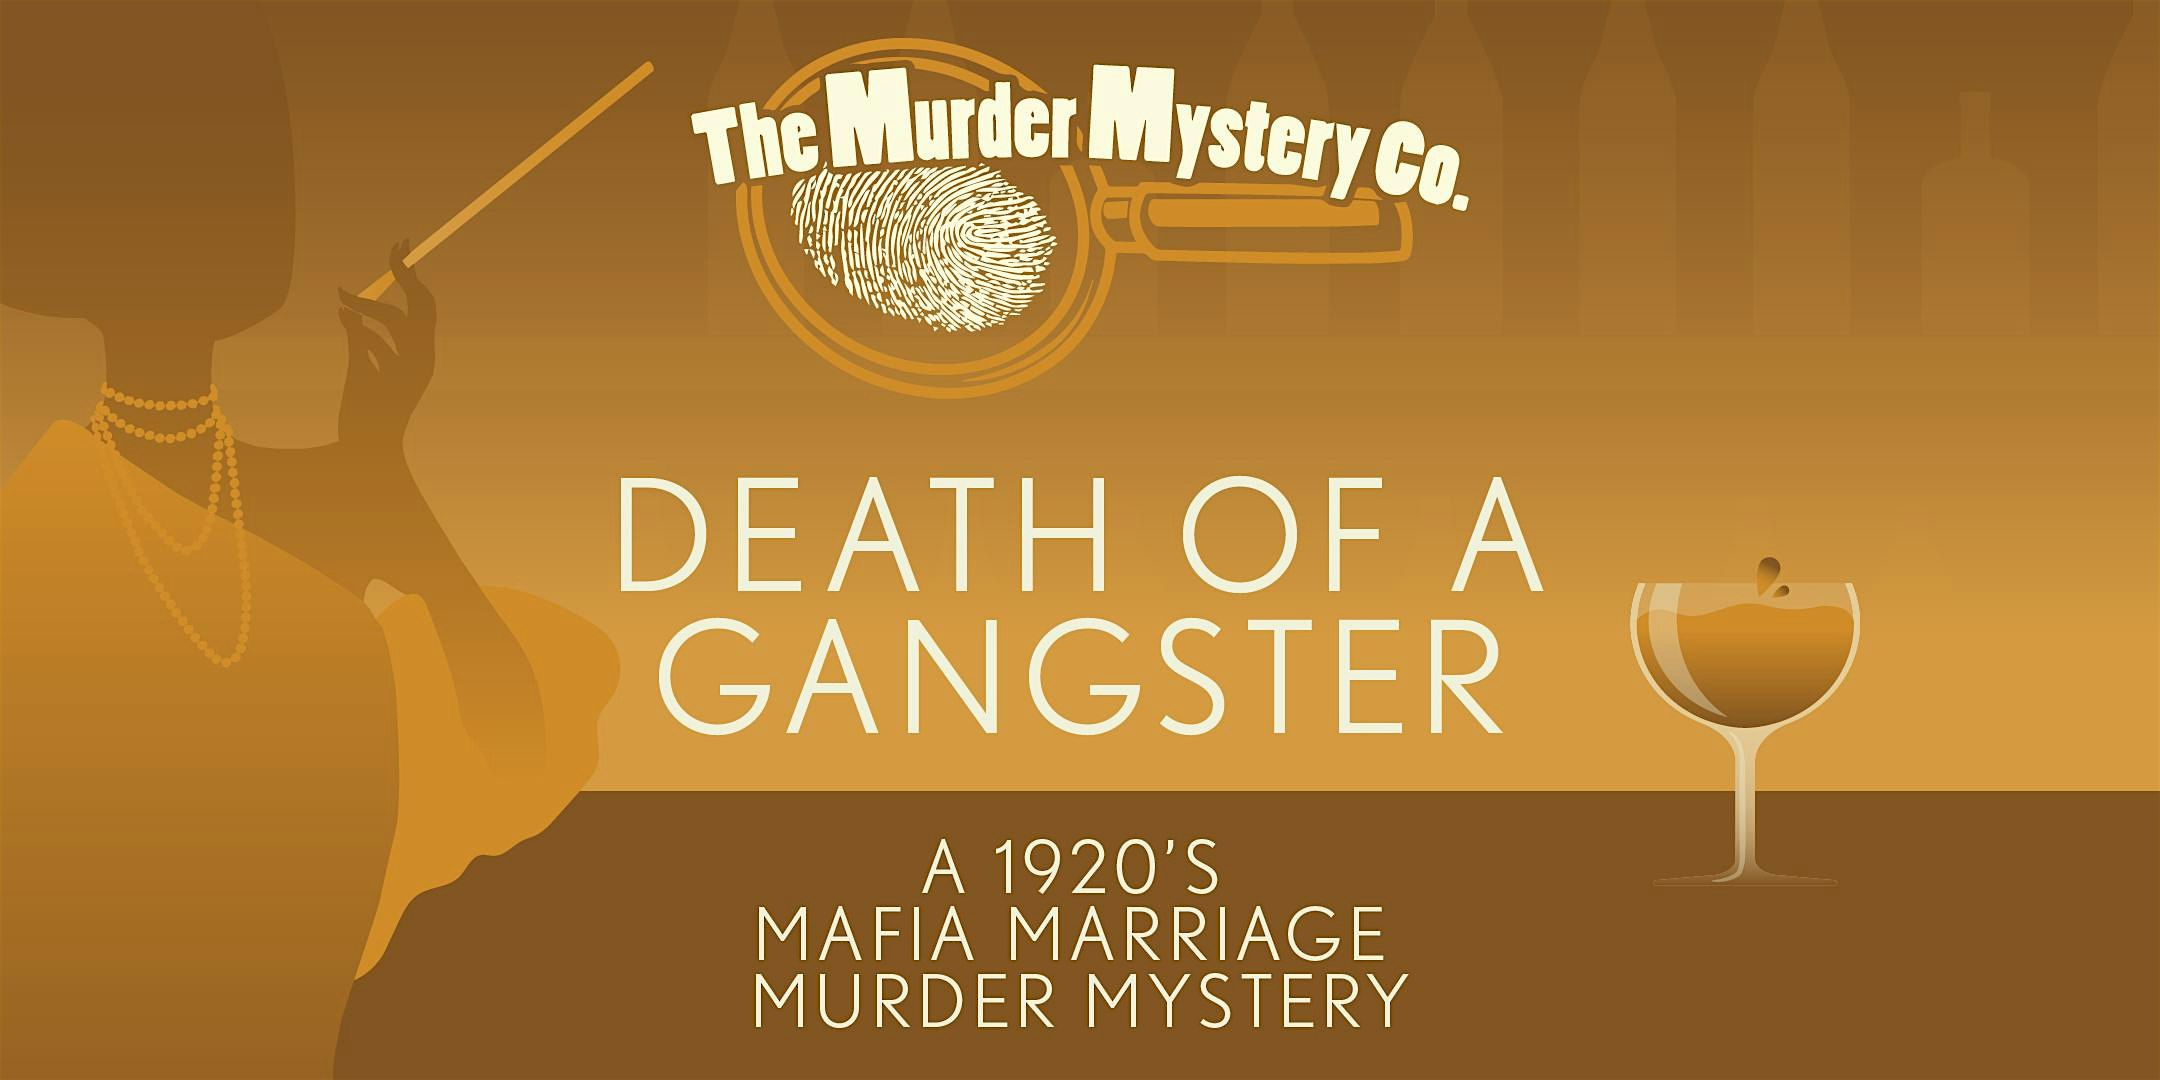 Murder Mystery Dinner Theater Show in Phoenix: Death of a Gangster